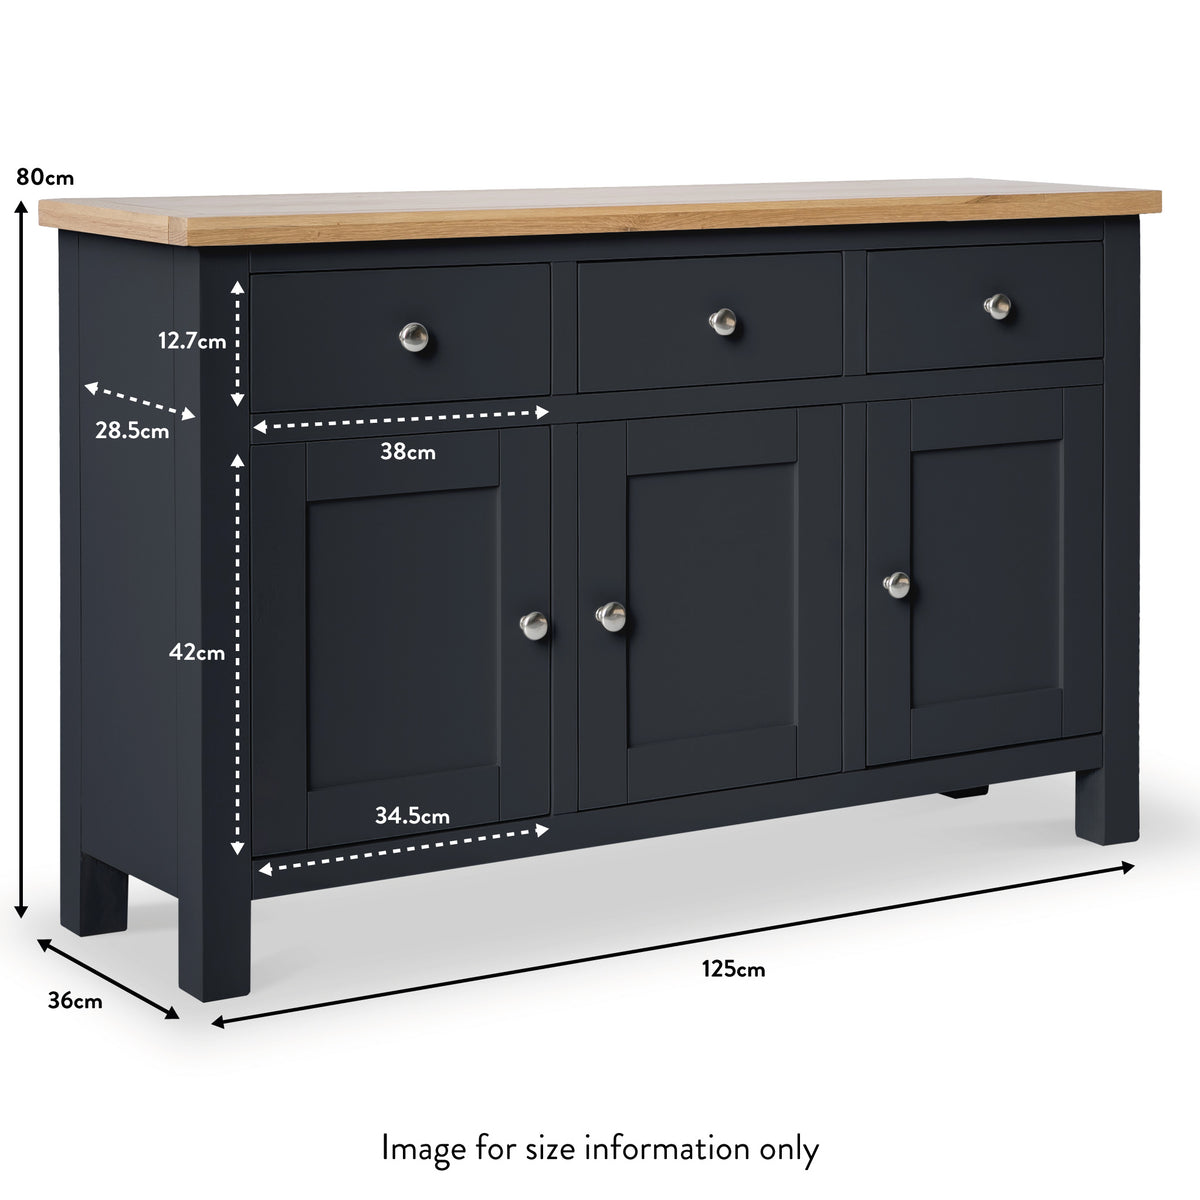 Farrow Large Sideboard Cabinet dimensions